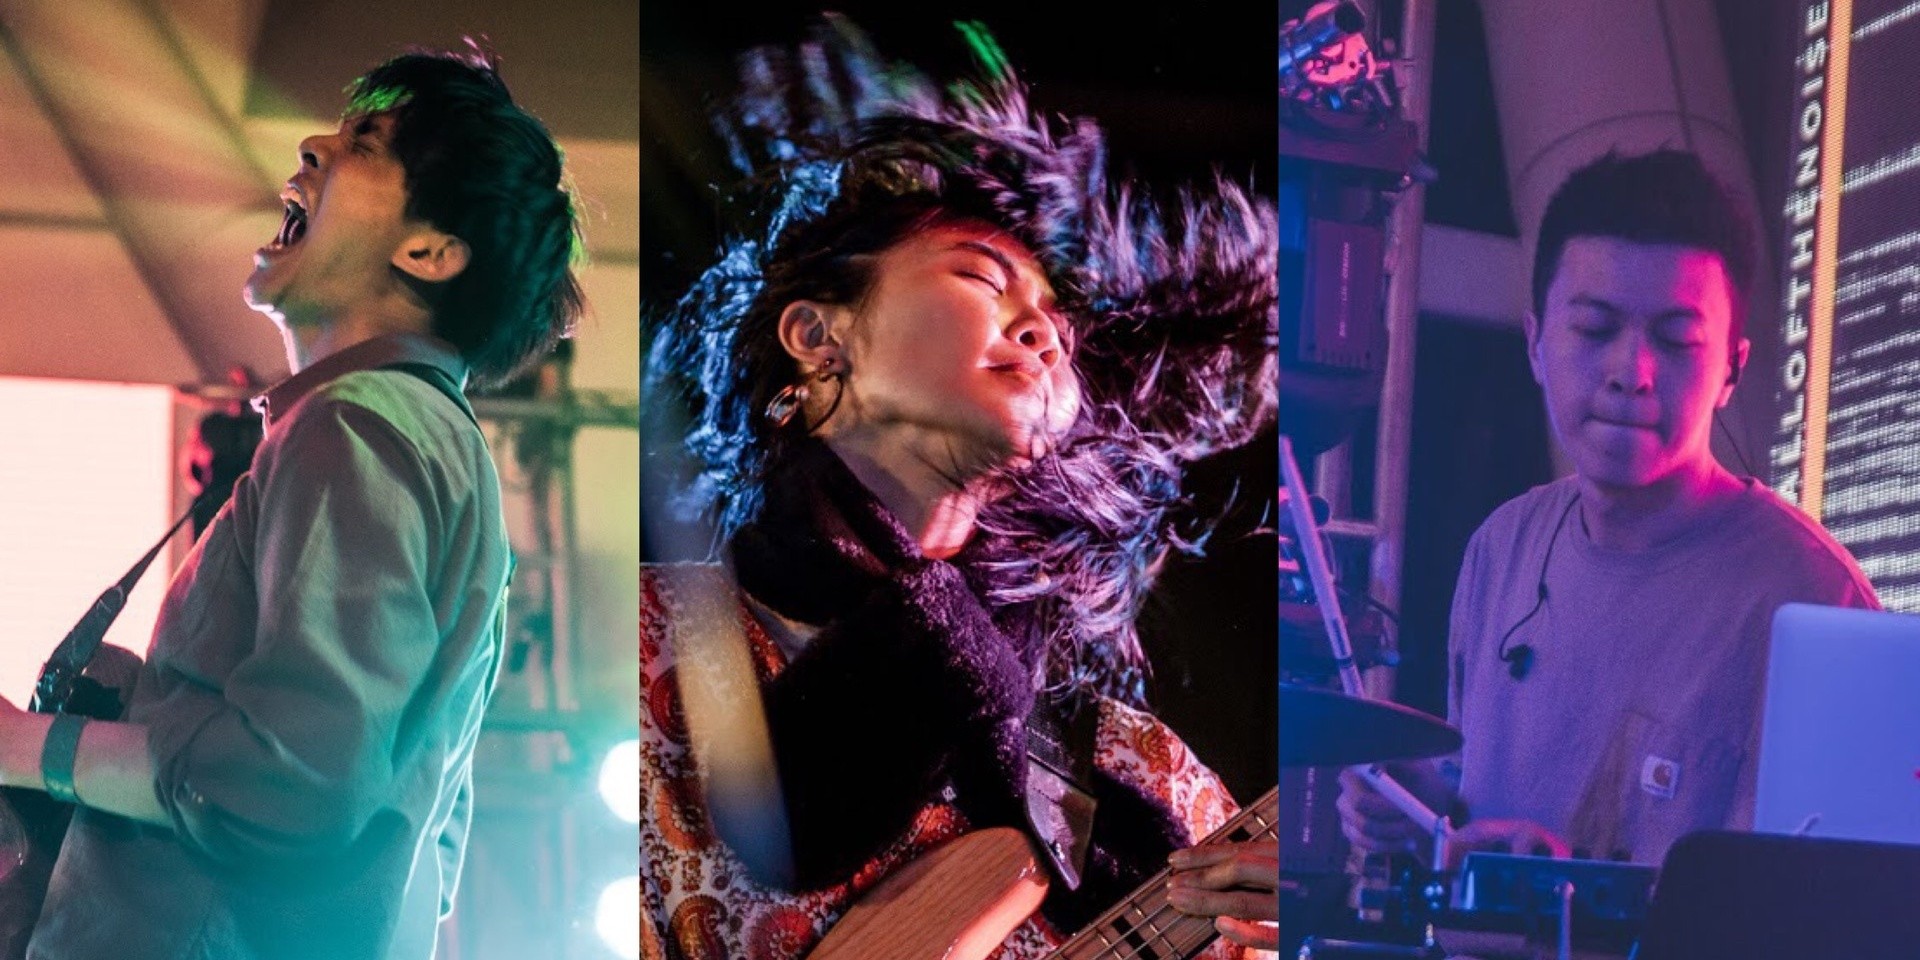 Elephant Gym to perform at ArcTanGent Festival with Coheed and Cambria, Polyphia, Meshuggah, and more